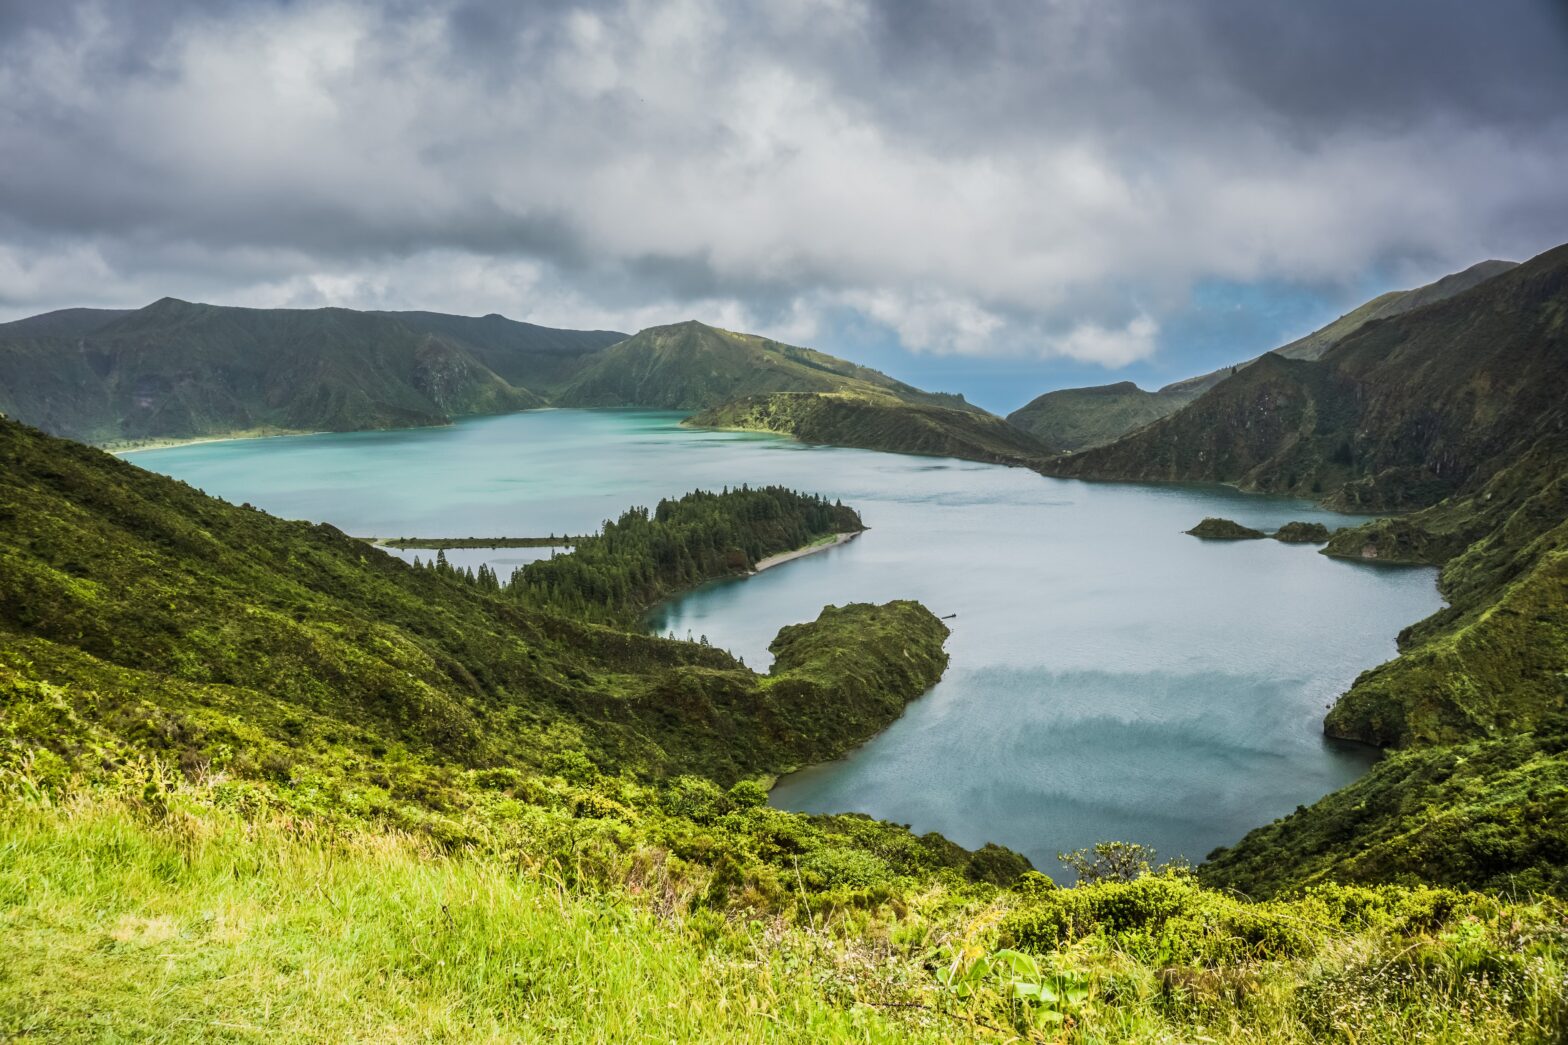 Have You Heard Of The Azores Islands?